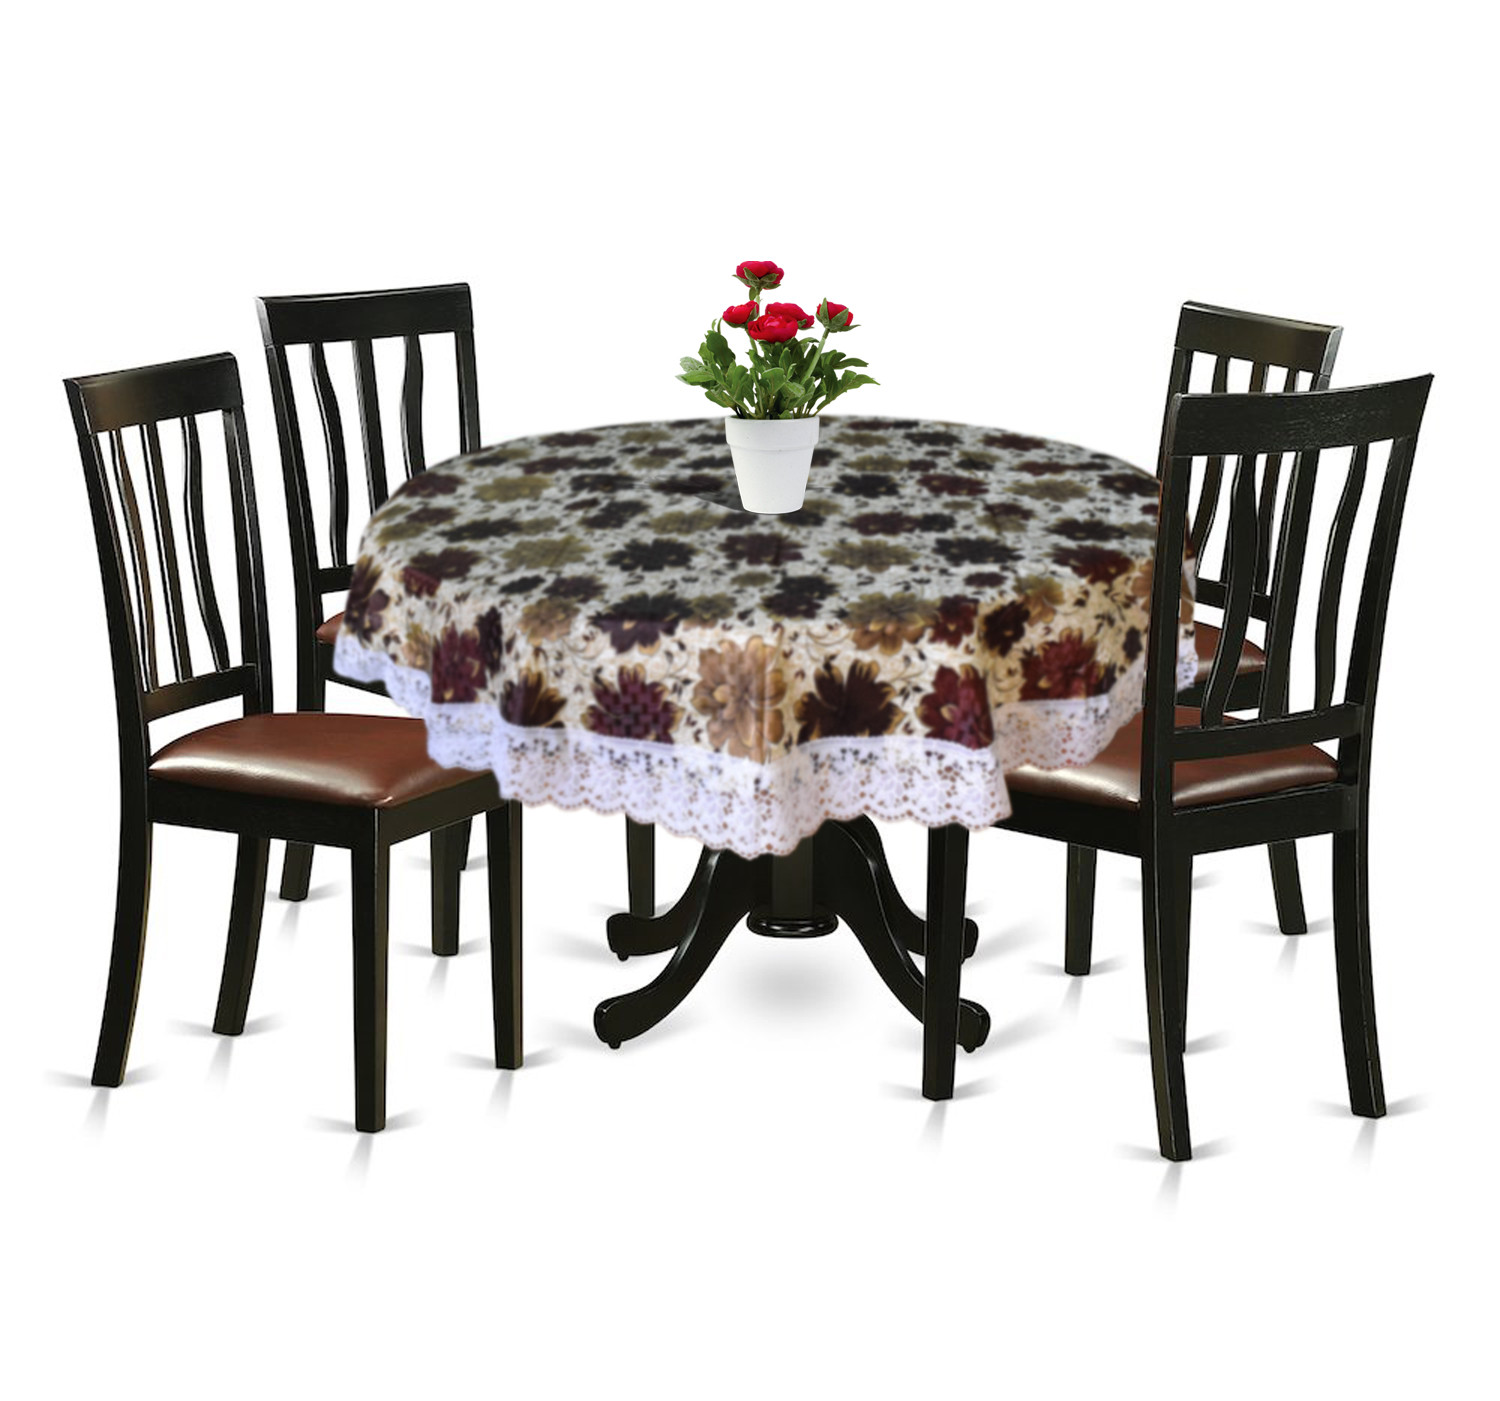 Kuber Industries Flower Printed PVC 4 Seater Round Shape Table Cover, Protector With White Lace Border, 60